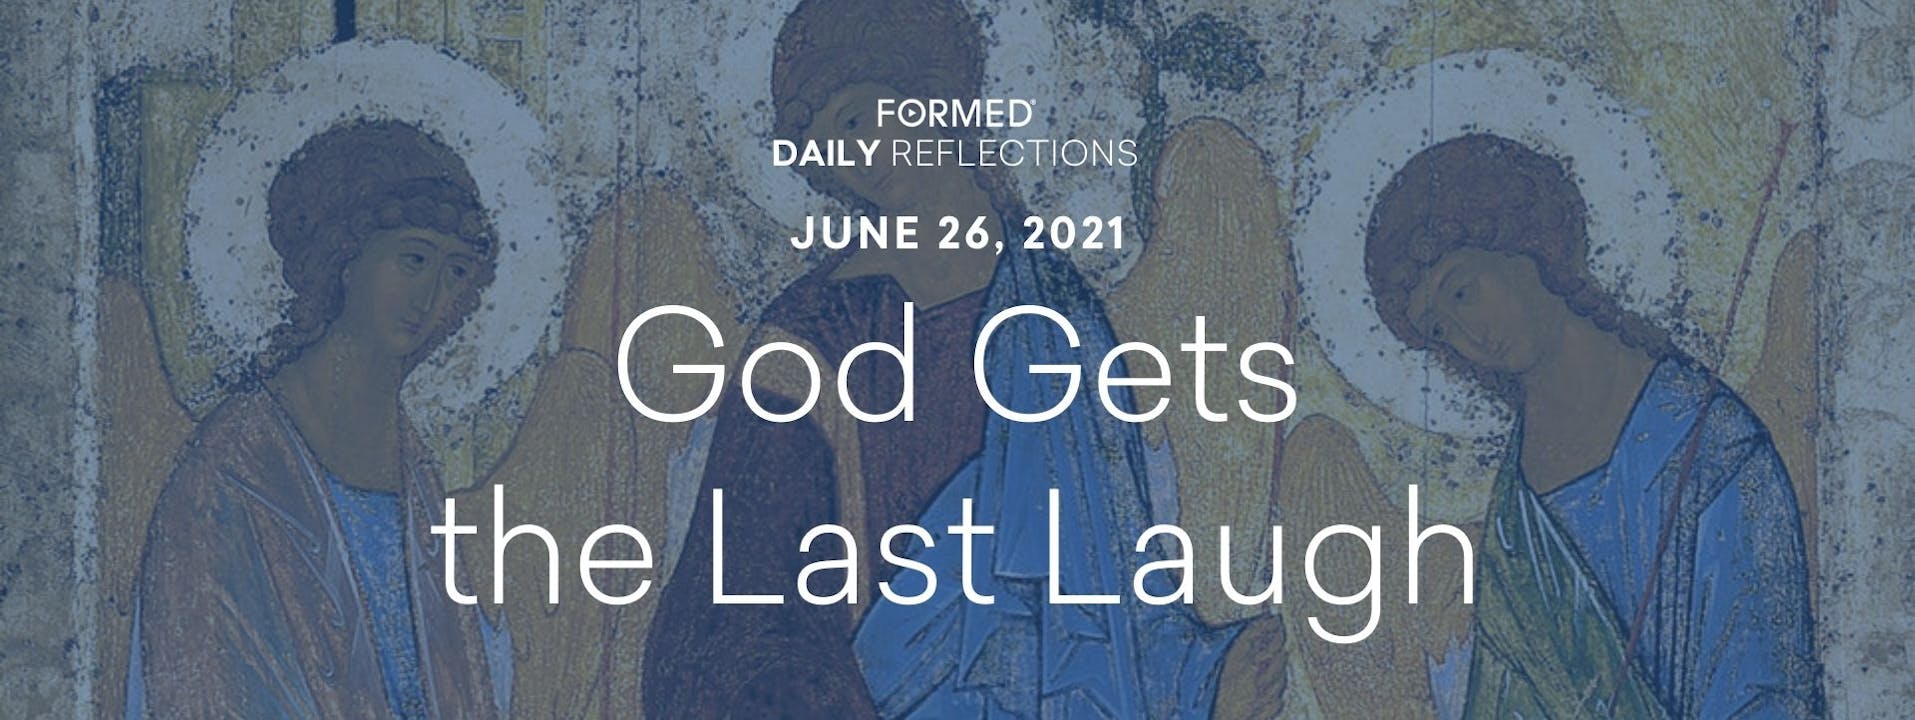 Daily Reflections June 26 2021 Ordinary Time June 2021 FORMED